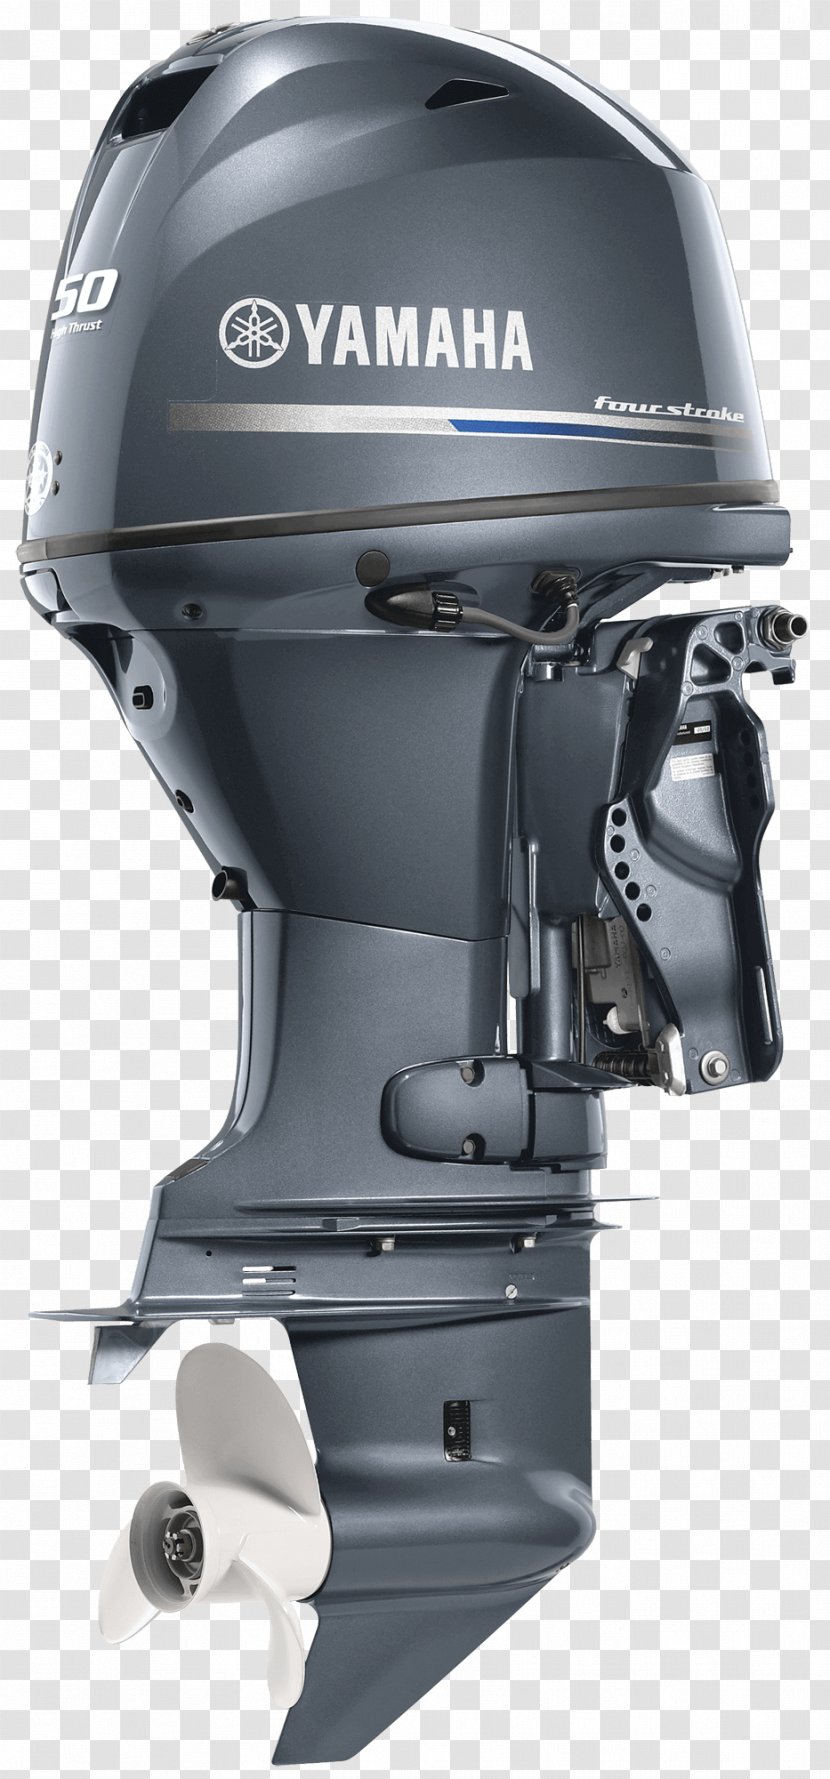 Yamaha Motor Company Outboard Boat Four-stroke Engine - Motorcycle Helmet - Large Anchor Parts Transparent PNG